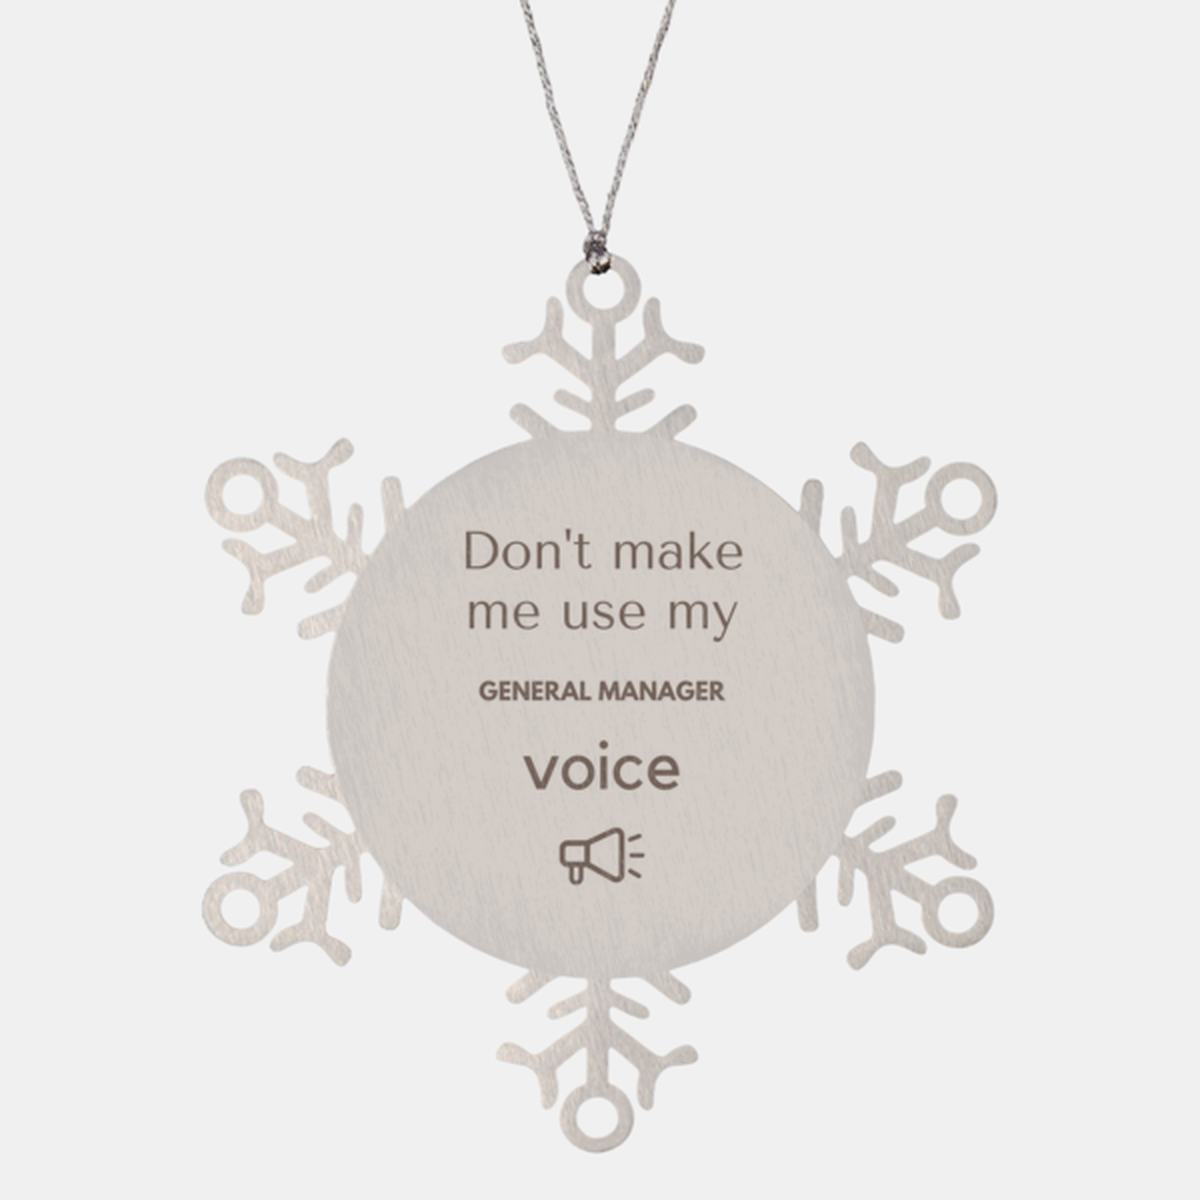 Don't make me use my General Manager voice, Sarcasm General Manager Ornament Gifts, Christmas General Manager Snowflake Ornament Unique Gifts For General Manager Coworkers, Men, Women, Colleague, Friends